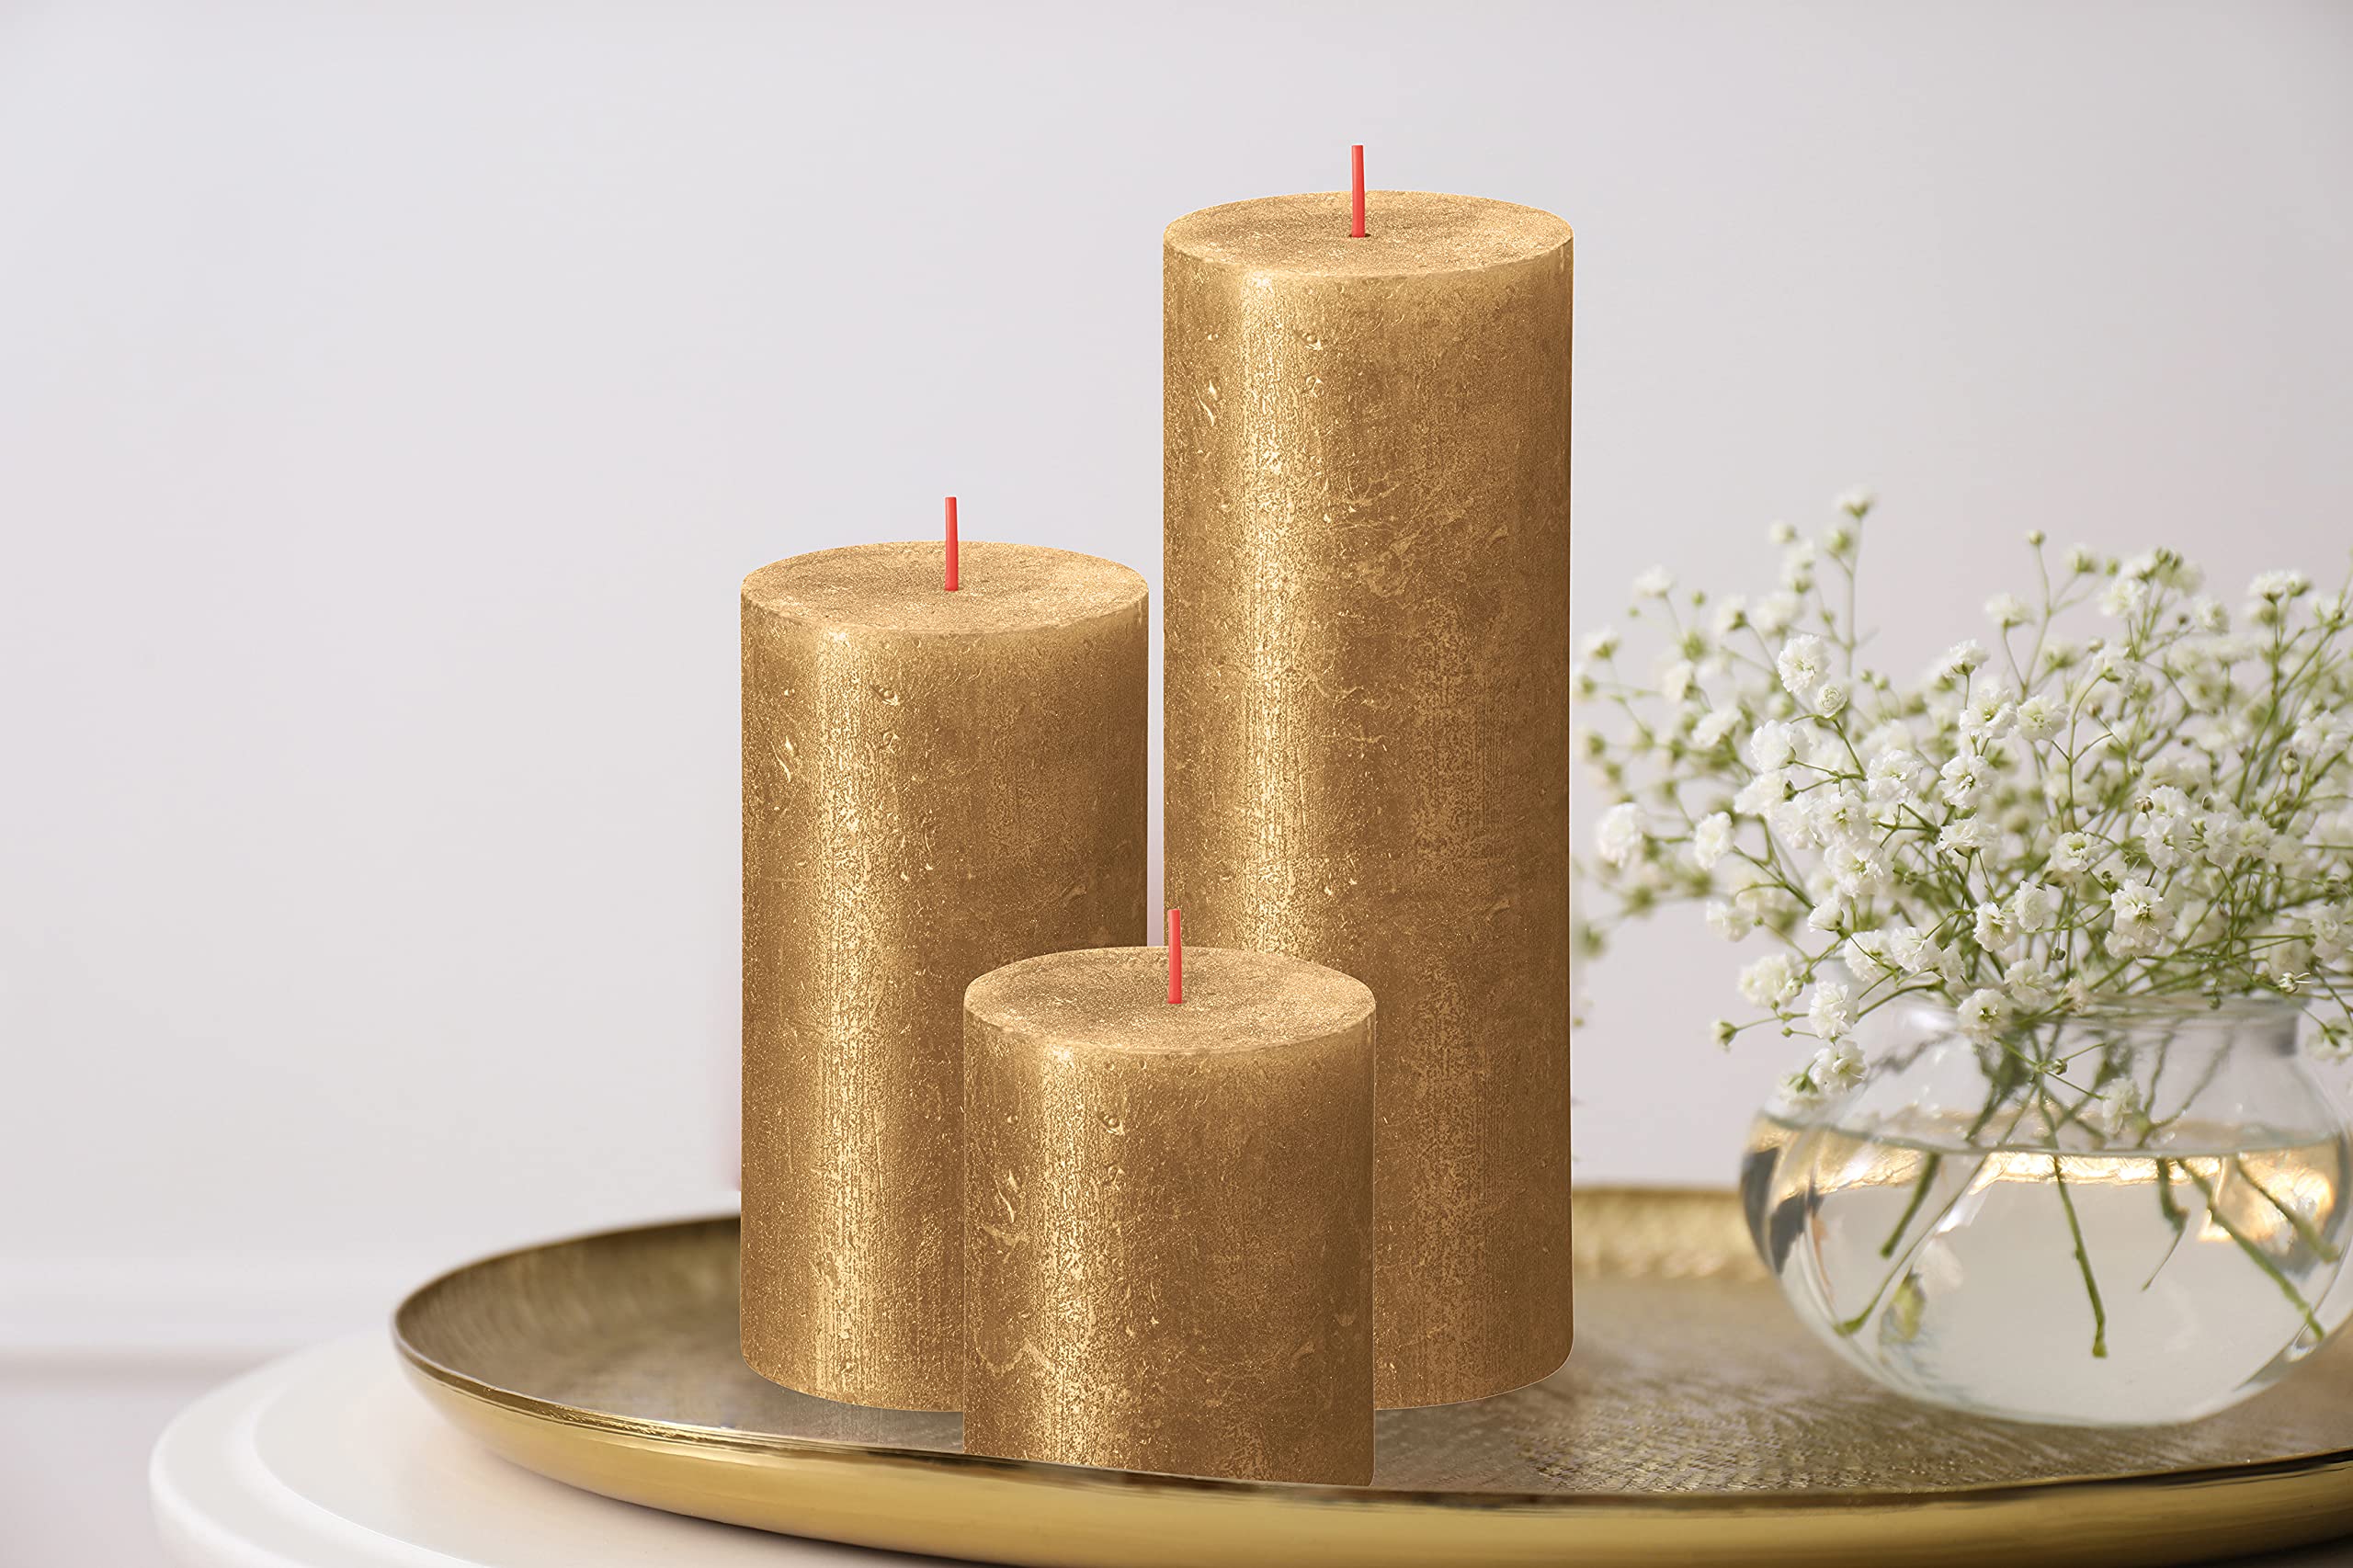 BOLSIUS Gold Shimmer Metallic Pillar Candles 4 Pack - 2.75 X 7.5 Inches - Premium European Quality - Includes Natural Plant-Based Wax - Unscented Dripless Smokeless 85 Hour Party & Wedding Candles  - Like New